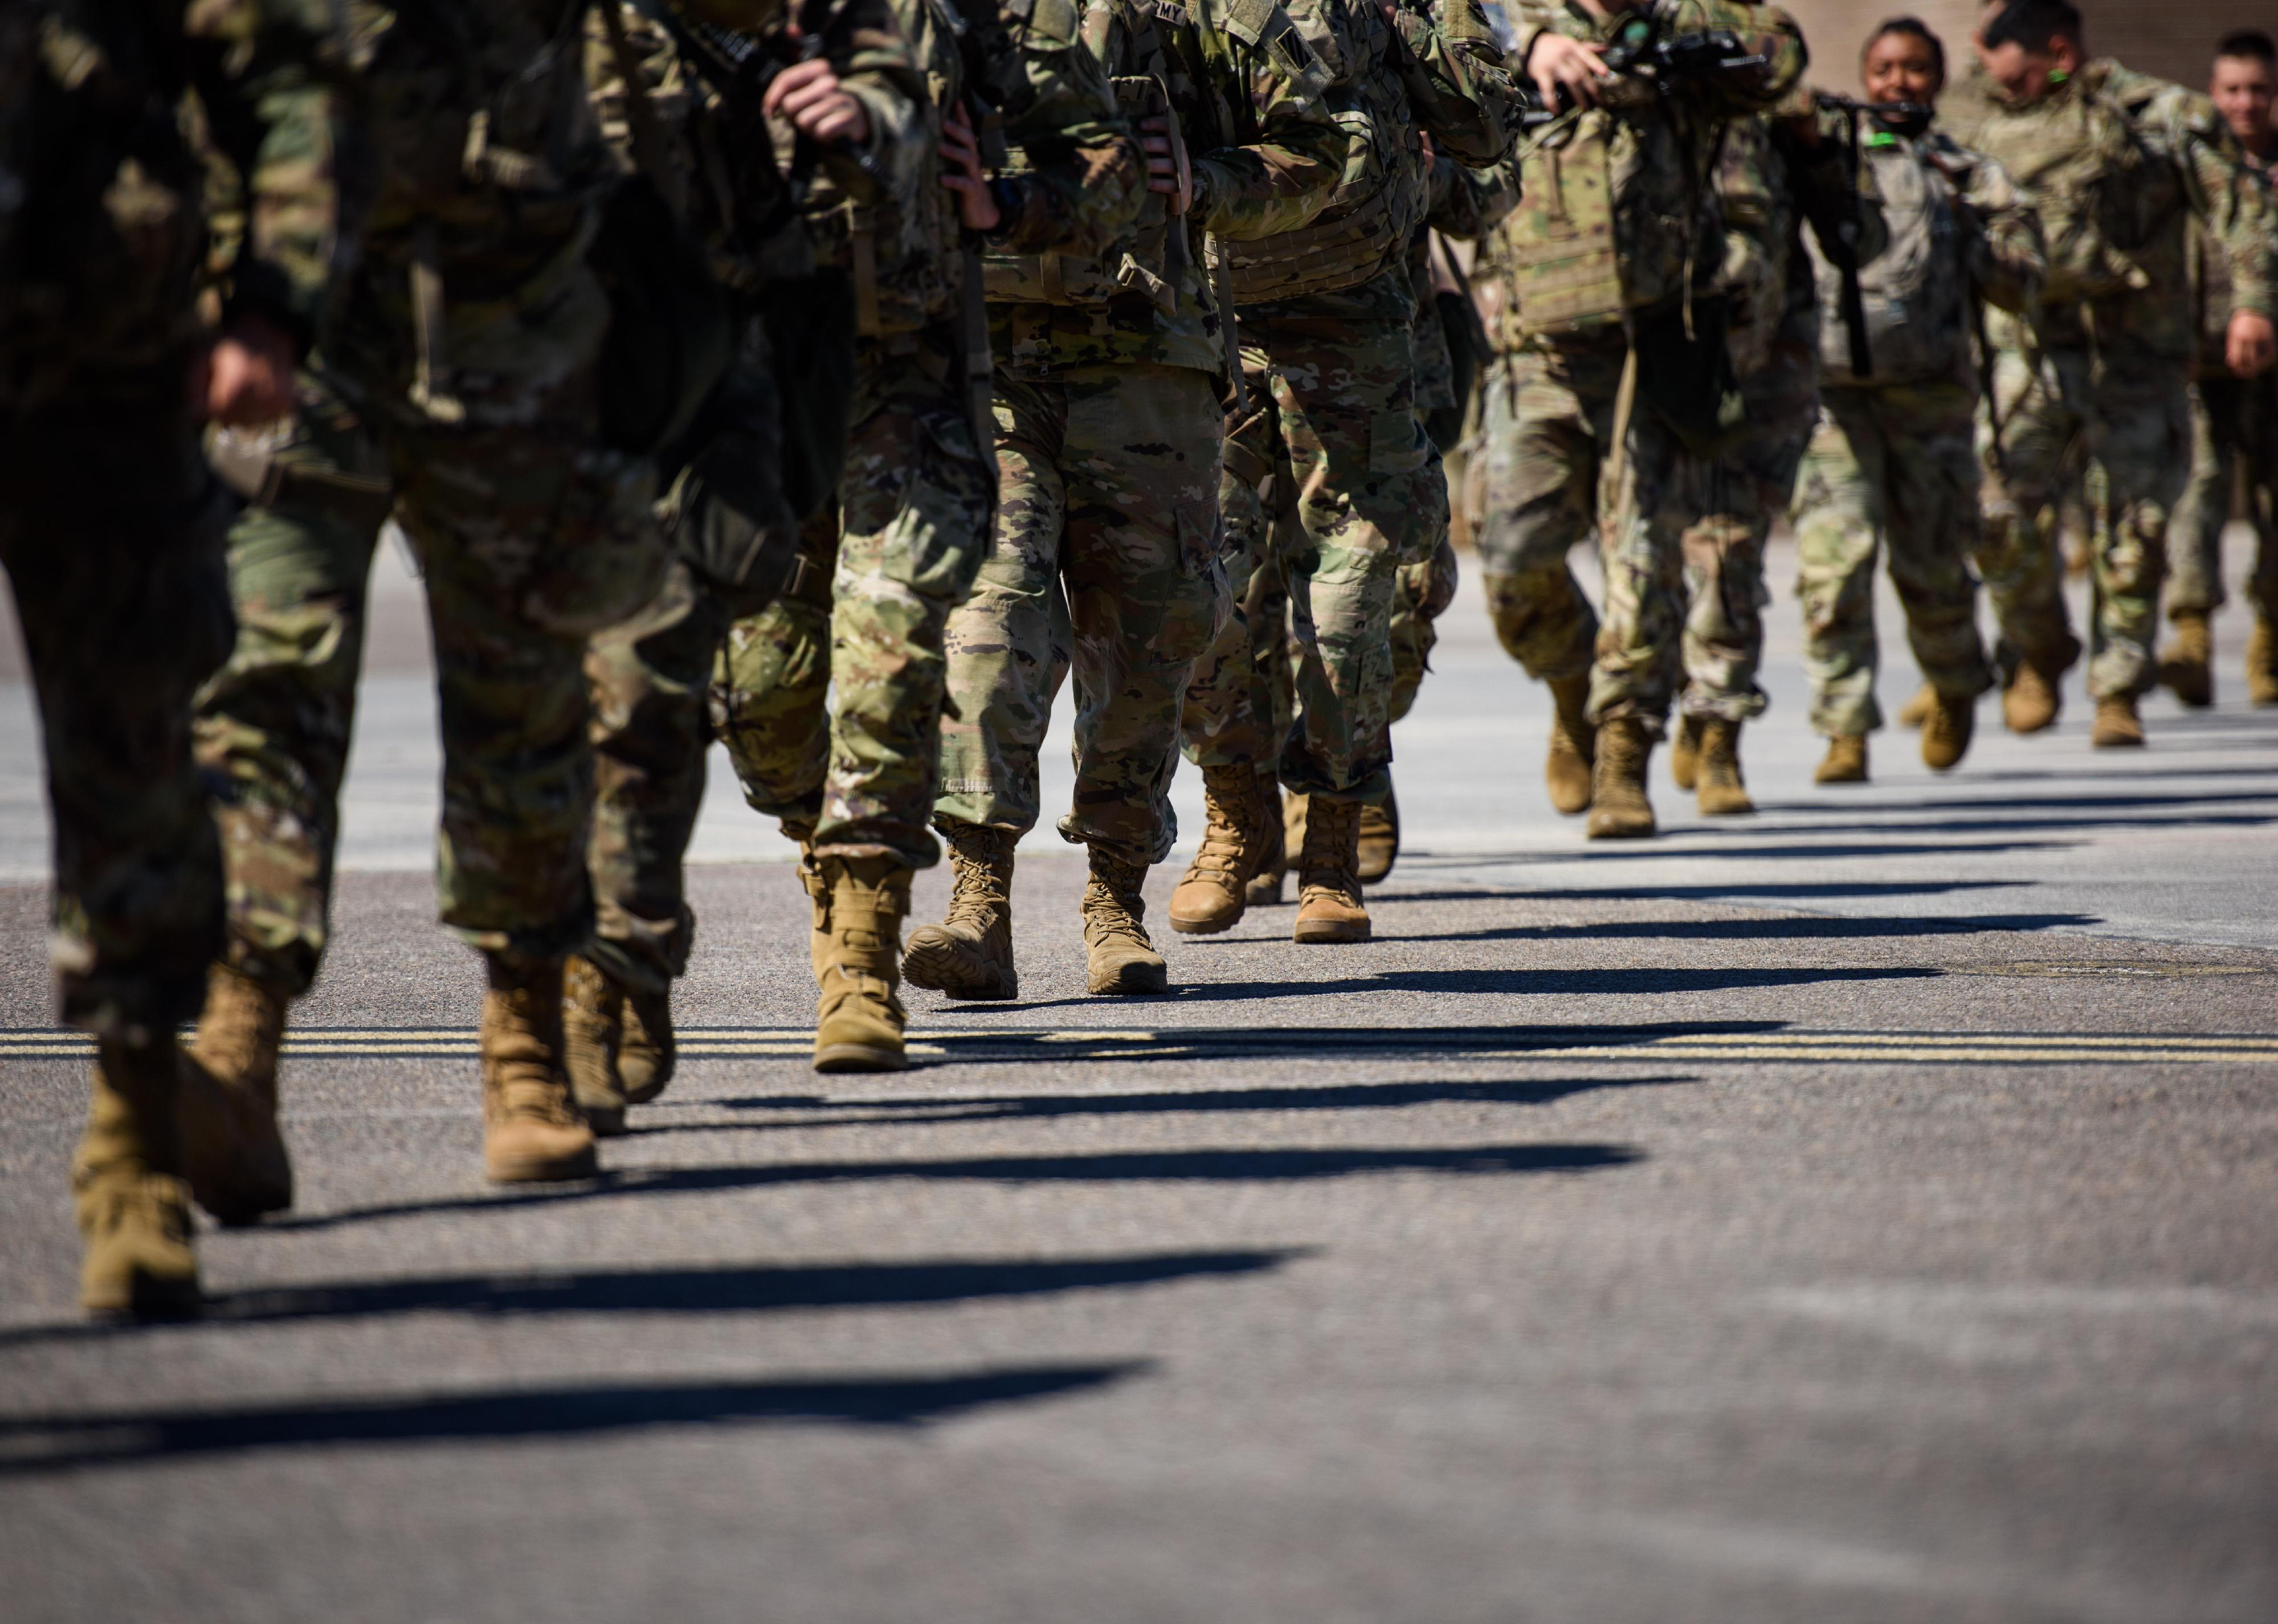 U.S. Army soldiers walking in a line.